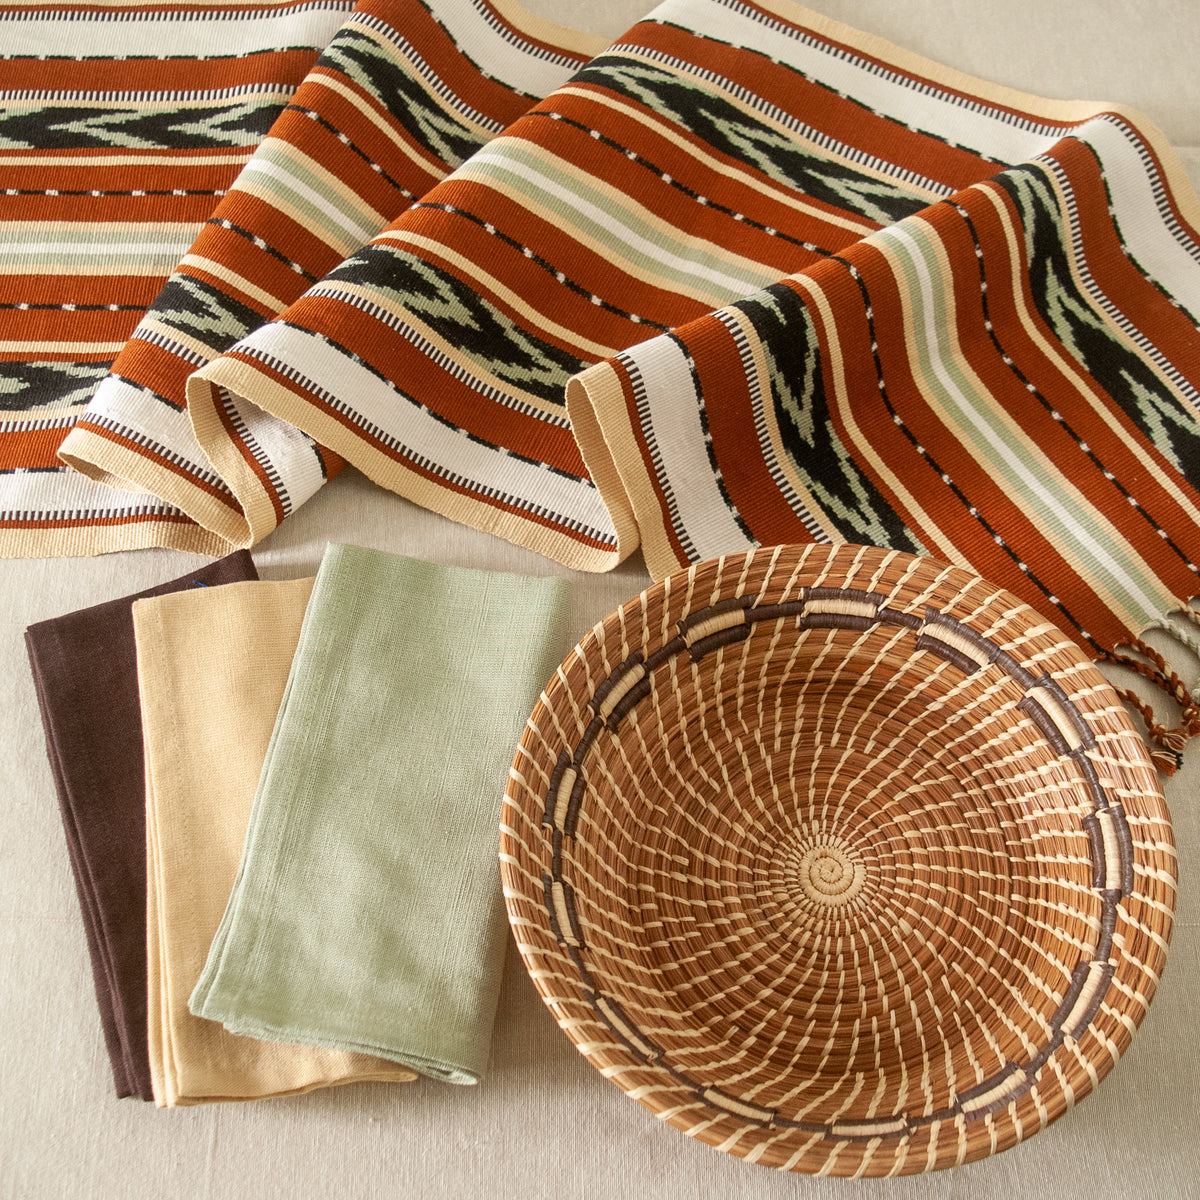 handwoven jaspe table runner with pine needle basket and napkins | Mayan Hands